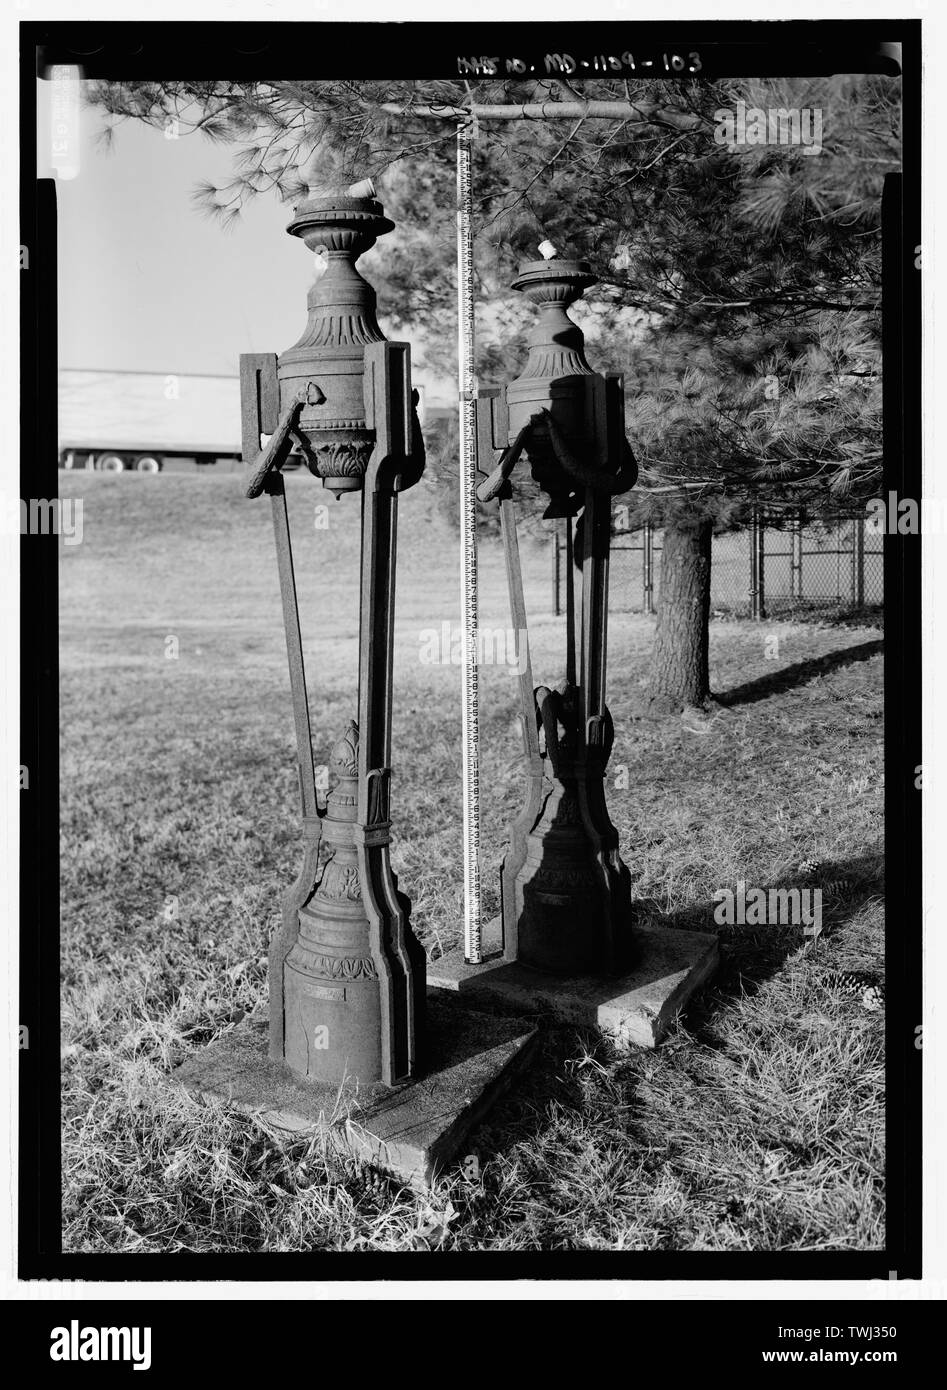 Sculpture, cast iron lamps at northeast corner of Stephen Sitter Avenue and Forney road, with scale - National Park Seminary, Bounded by Capitol Beltway (I-495), Linden Lane, Woodstove Avenue, and Smith Drive, Silver Spring, Montgomery County, MD; U.S.Department of the Army; Ray, Arthur; Cassedy, John Irving, A; Ament, James E; Davis, Roy Tasco; Holman, Emily Elizabeth; Schneider, Thomas Franklin; Rosenthal, James, field team; Price, Virginia B, transmitter; Ott, Cynthia, historian; Boucher, Jack E, photographer; Lavoie, Catherine C, project manager; Price, Virginia B, transmitter; Price, Virg Stock Photo